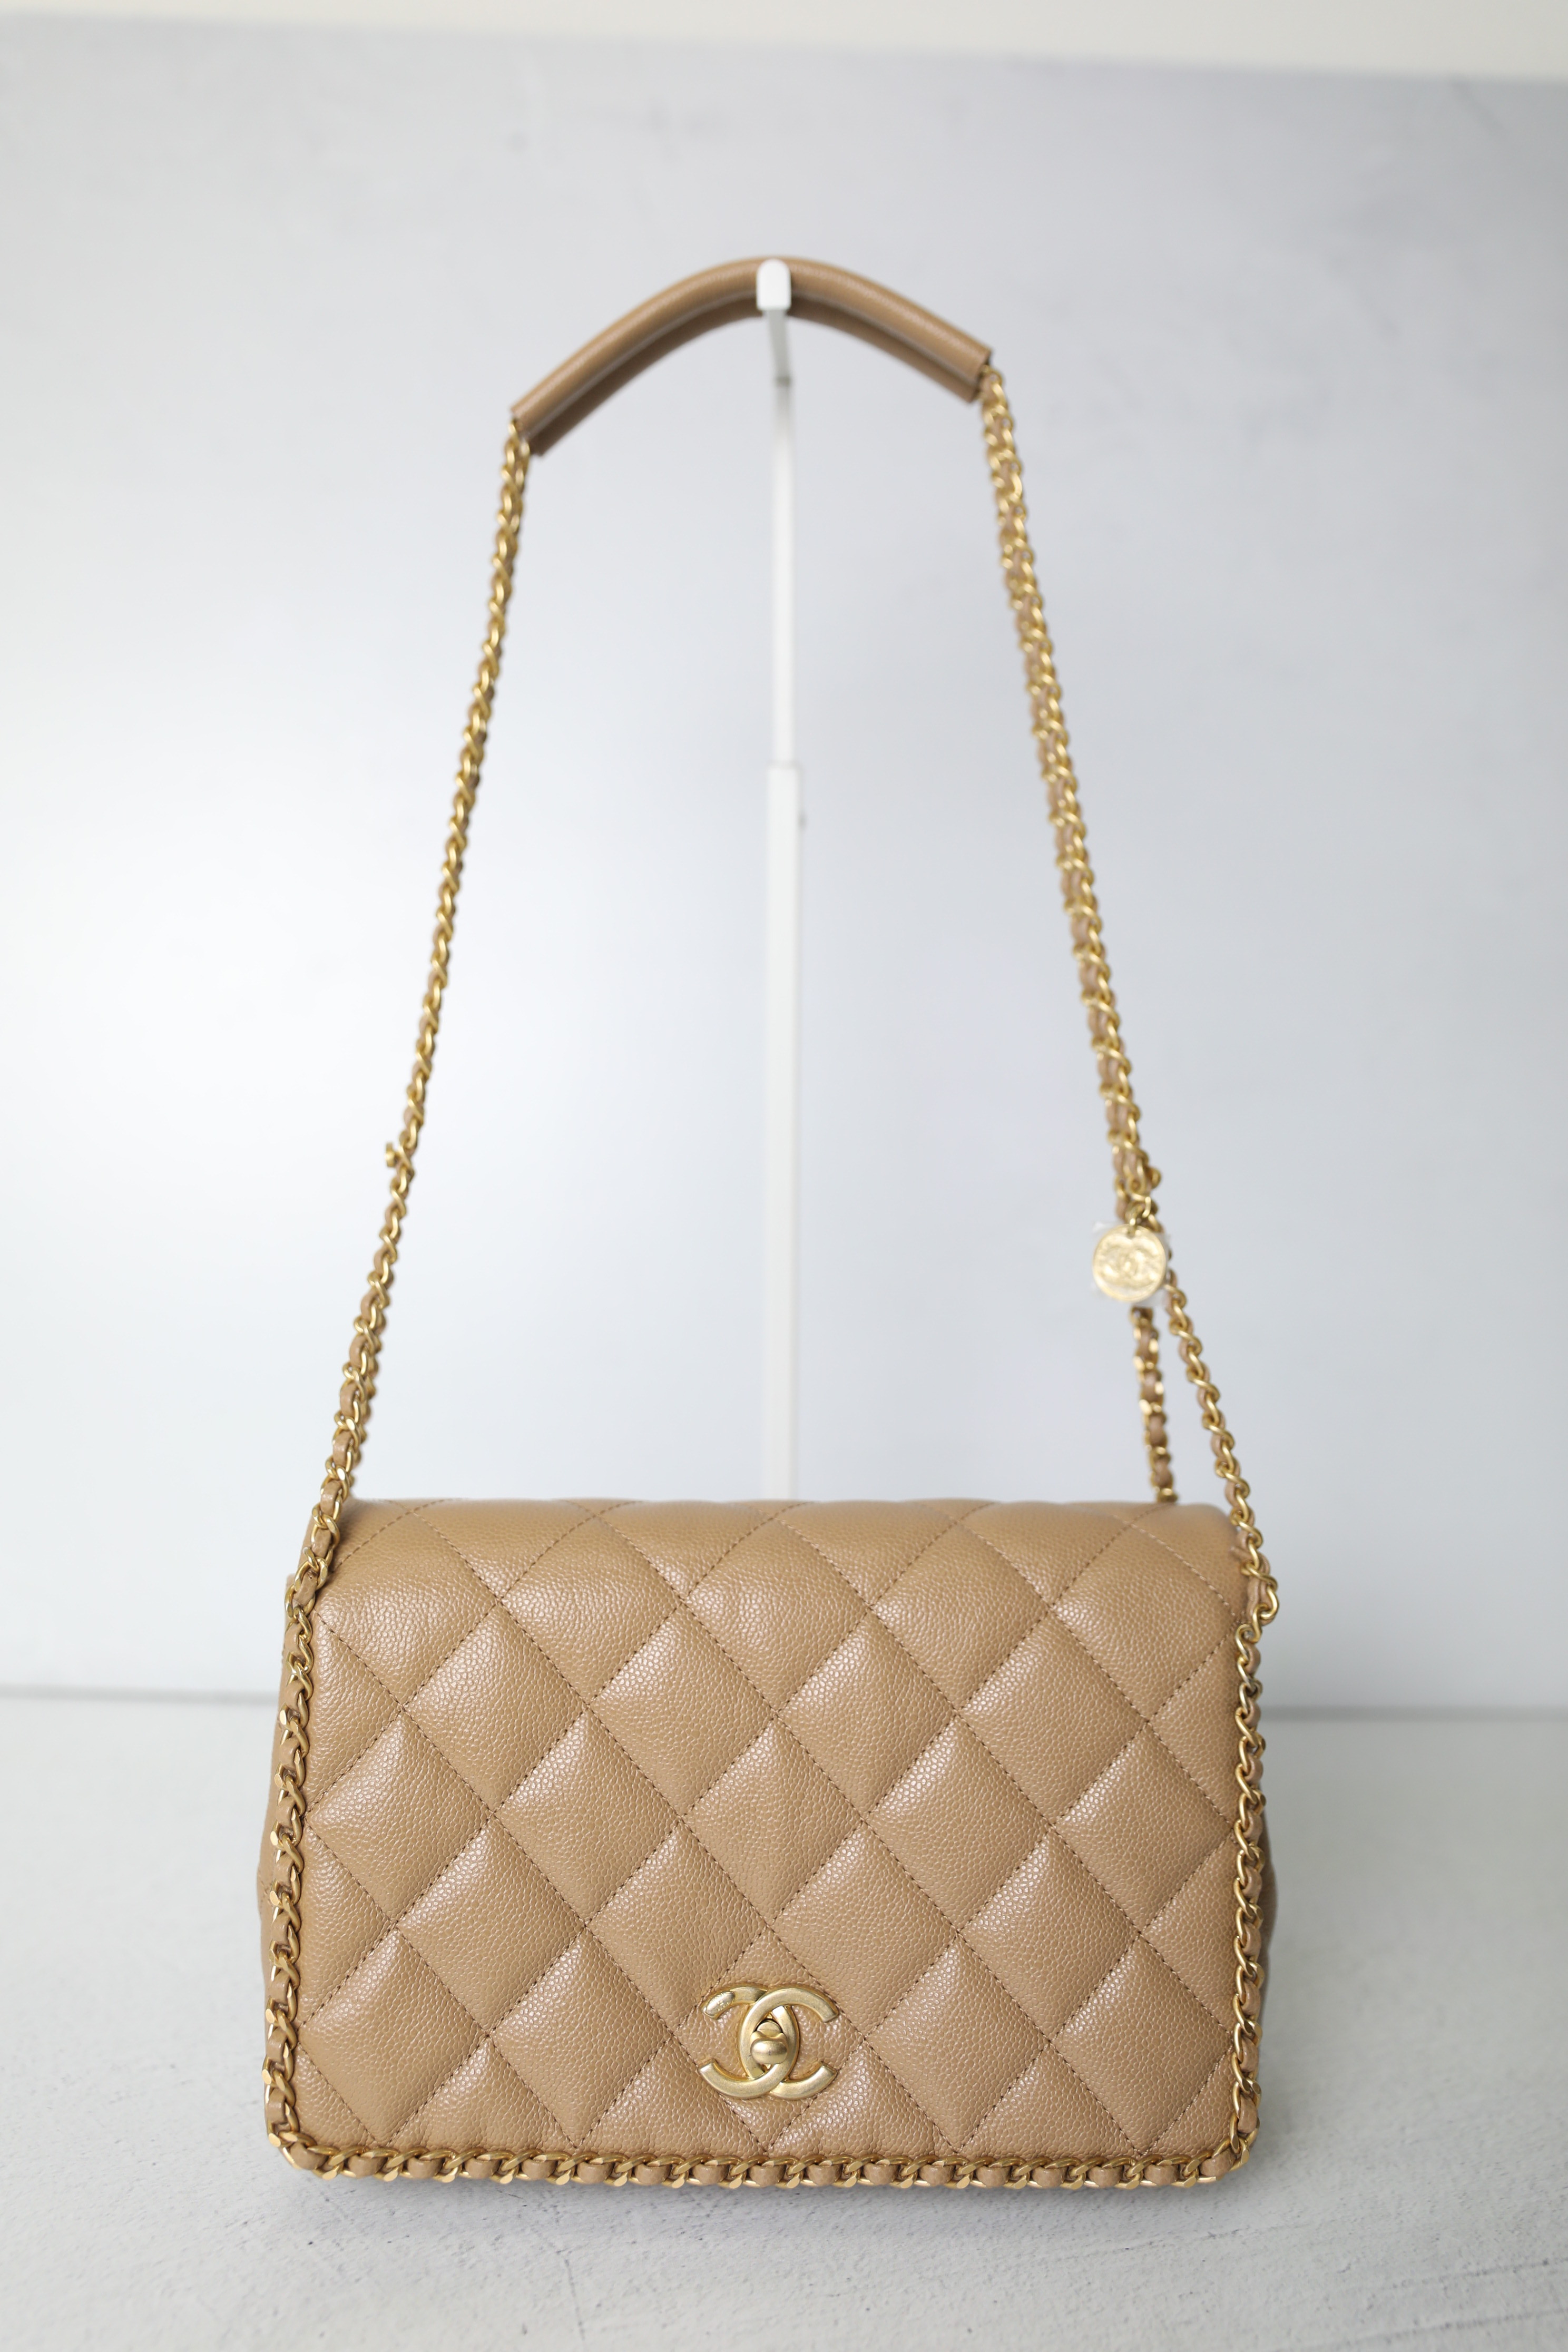 Chanel Seasonal Chain Around Flap, Beige Caviar Leather with Gold Hardware,  Preowned in Dustbag WA001 - Julia Rose Boston